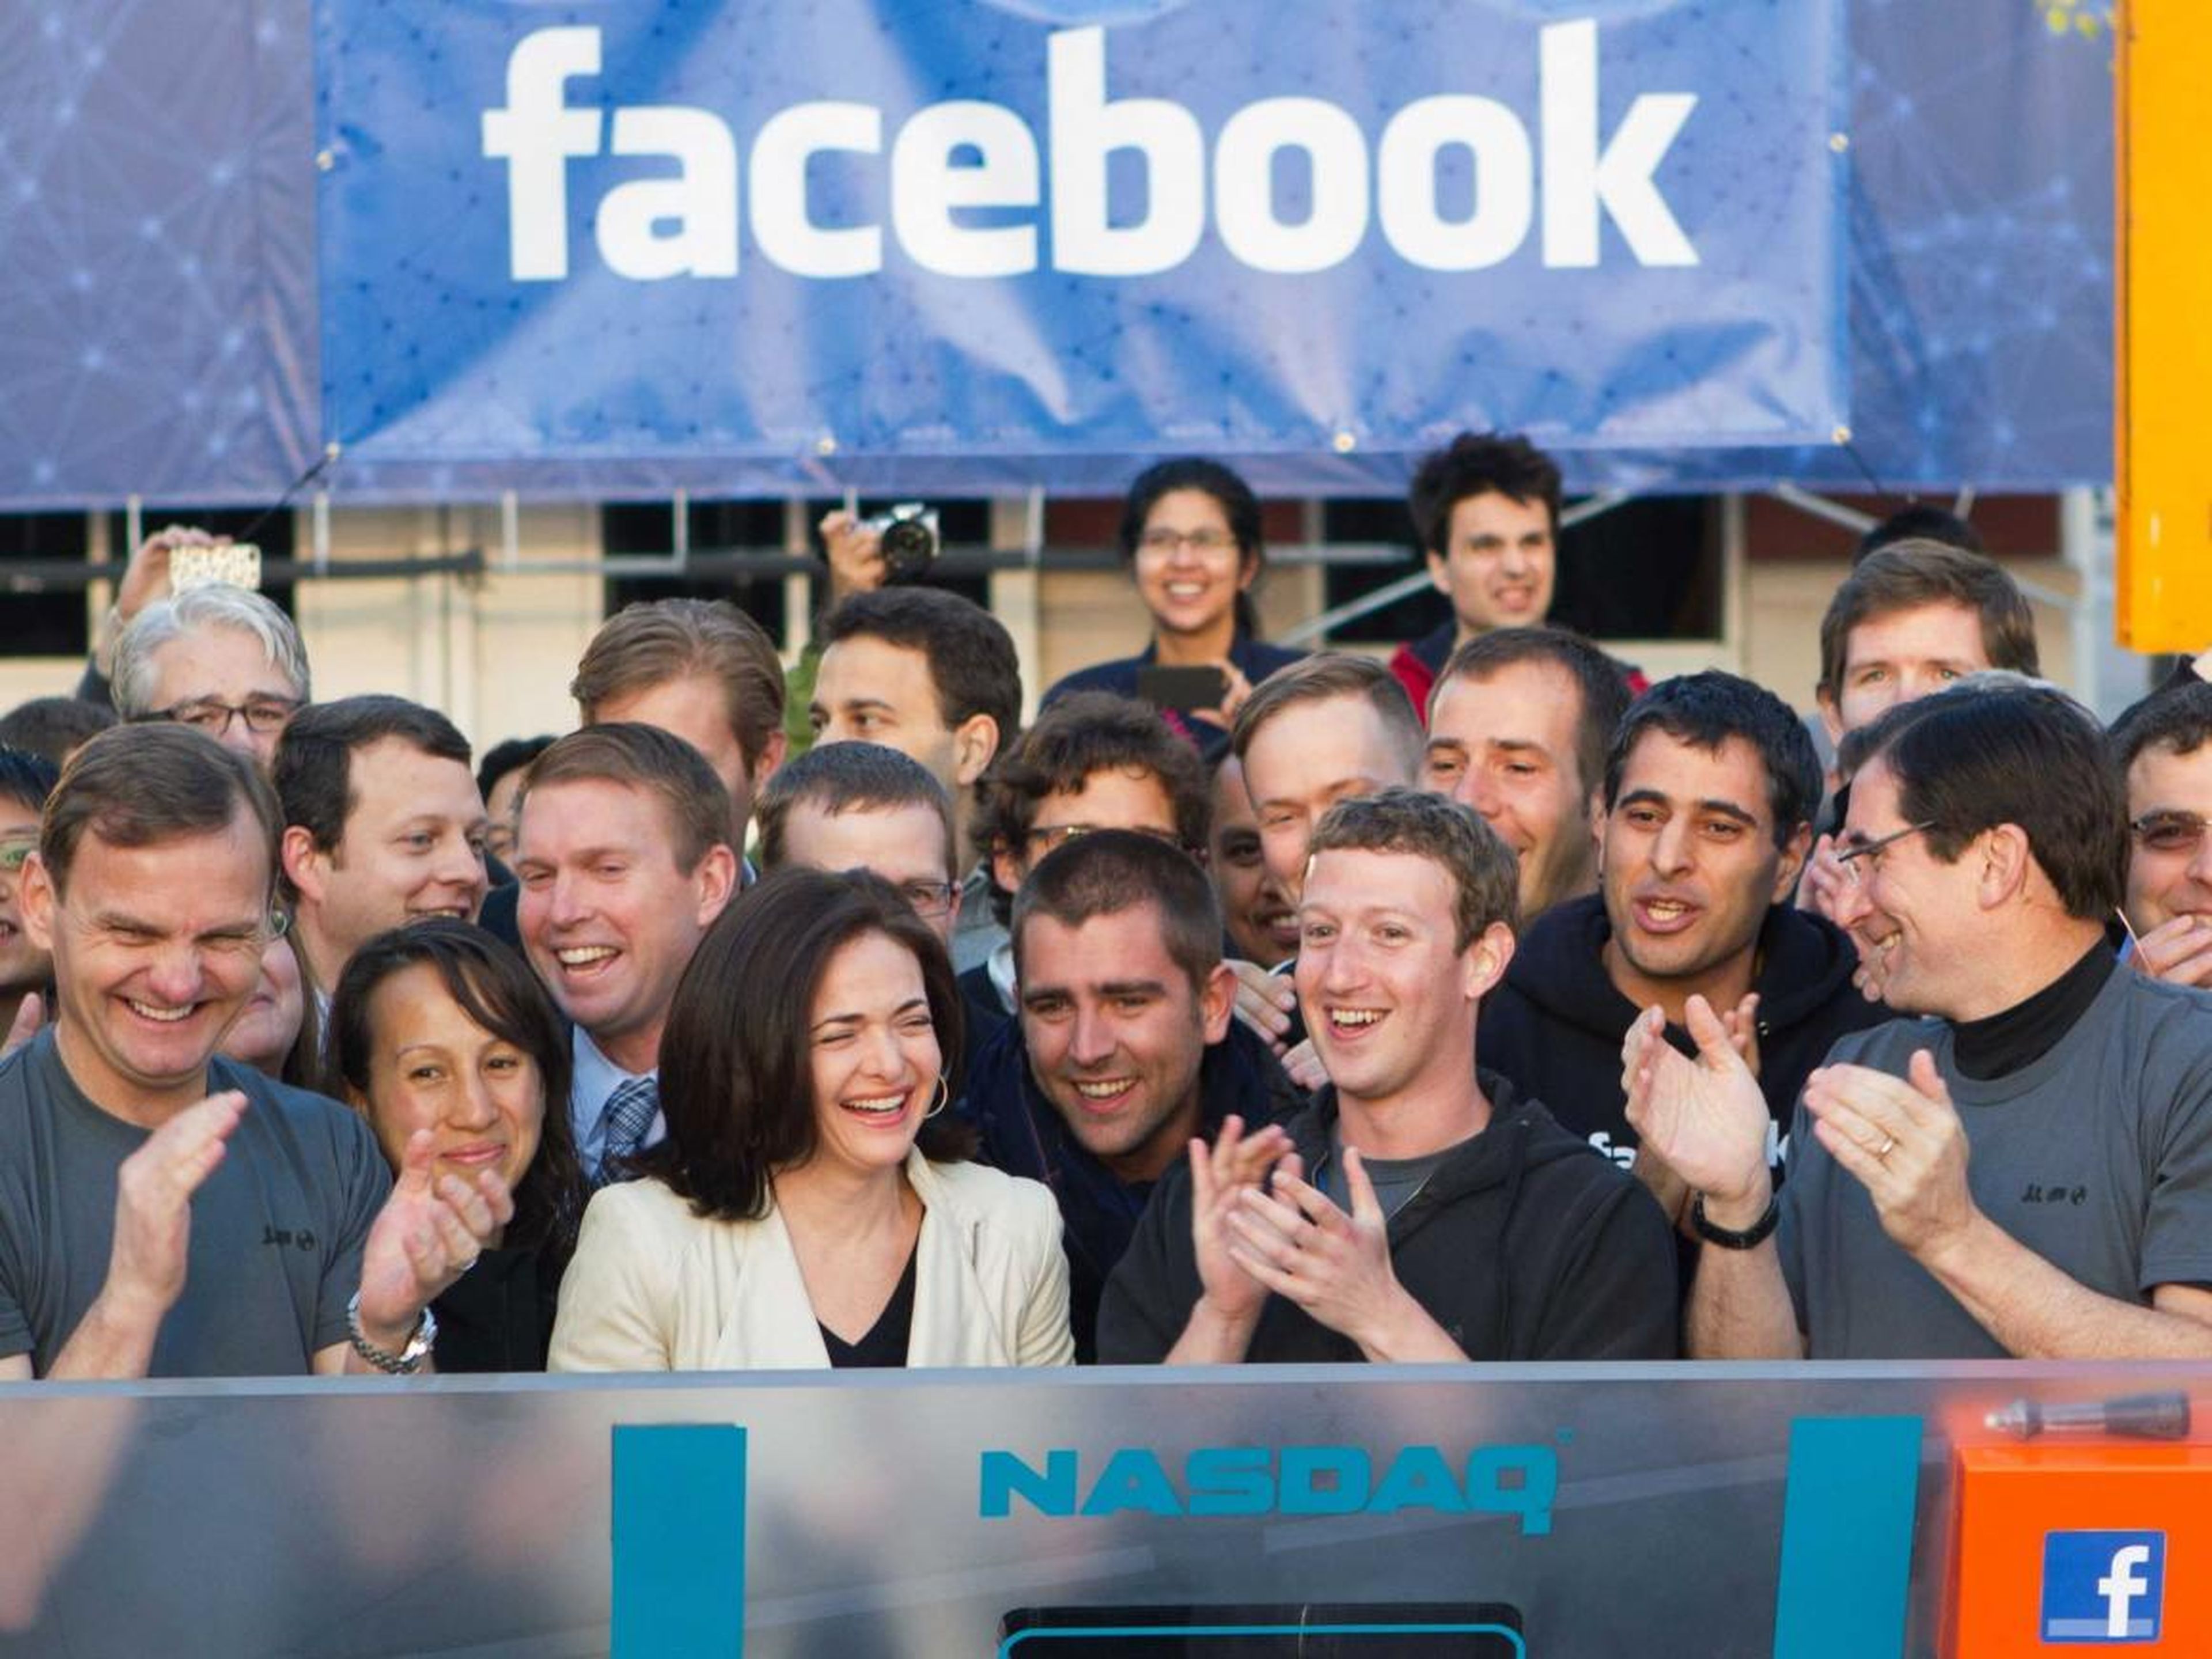 In 2012, Zuckerberg hit a career milestone as Facebook debuted on the New York Stock Exchange. At the time, it was the biggest technology IPO in history.